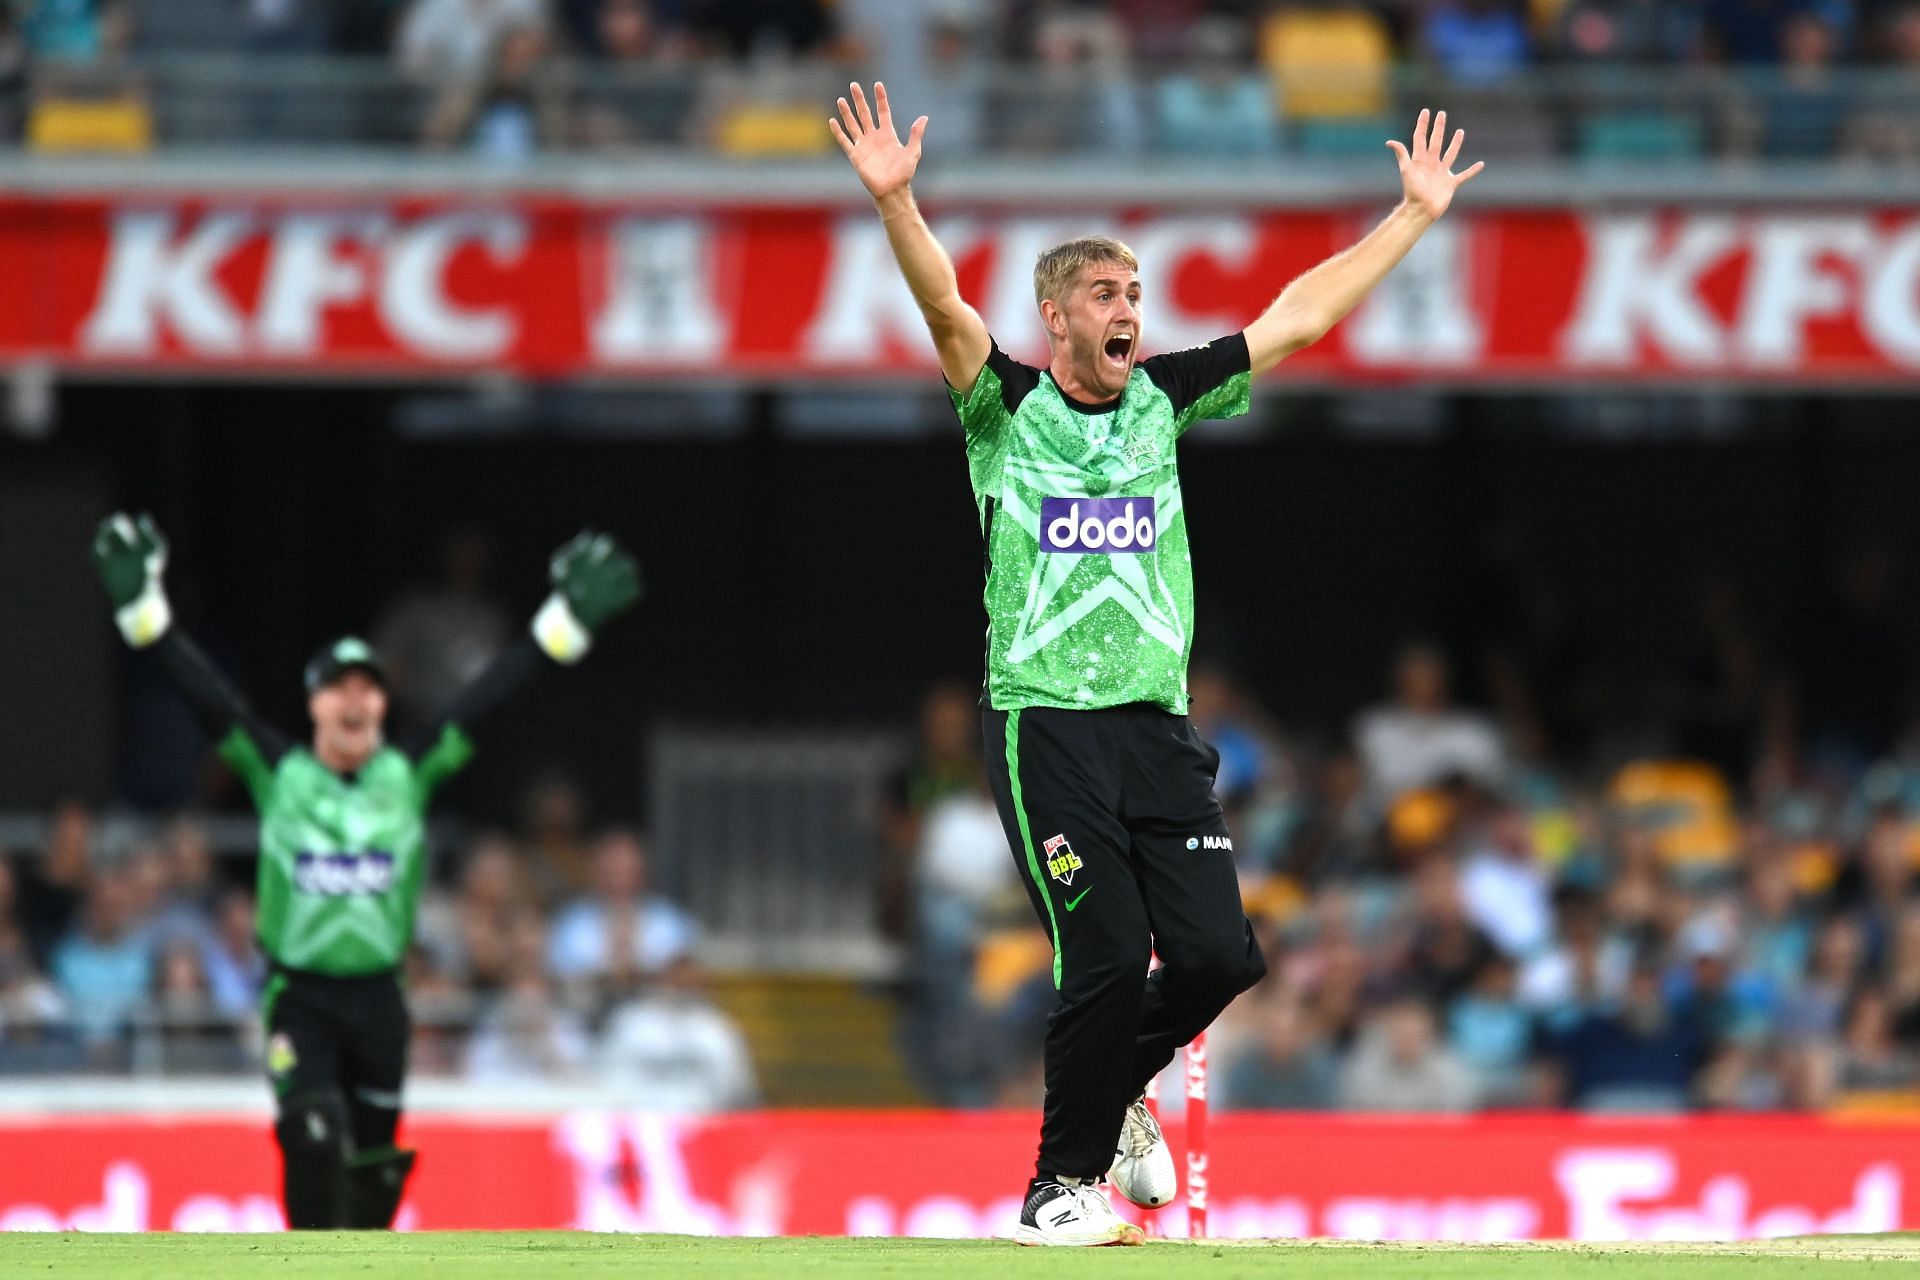 Olly Stone in action for the Melbourne Stars in the BBL.